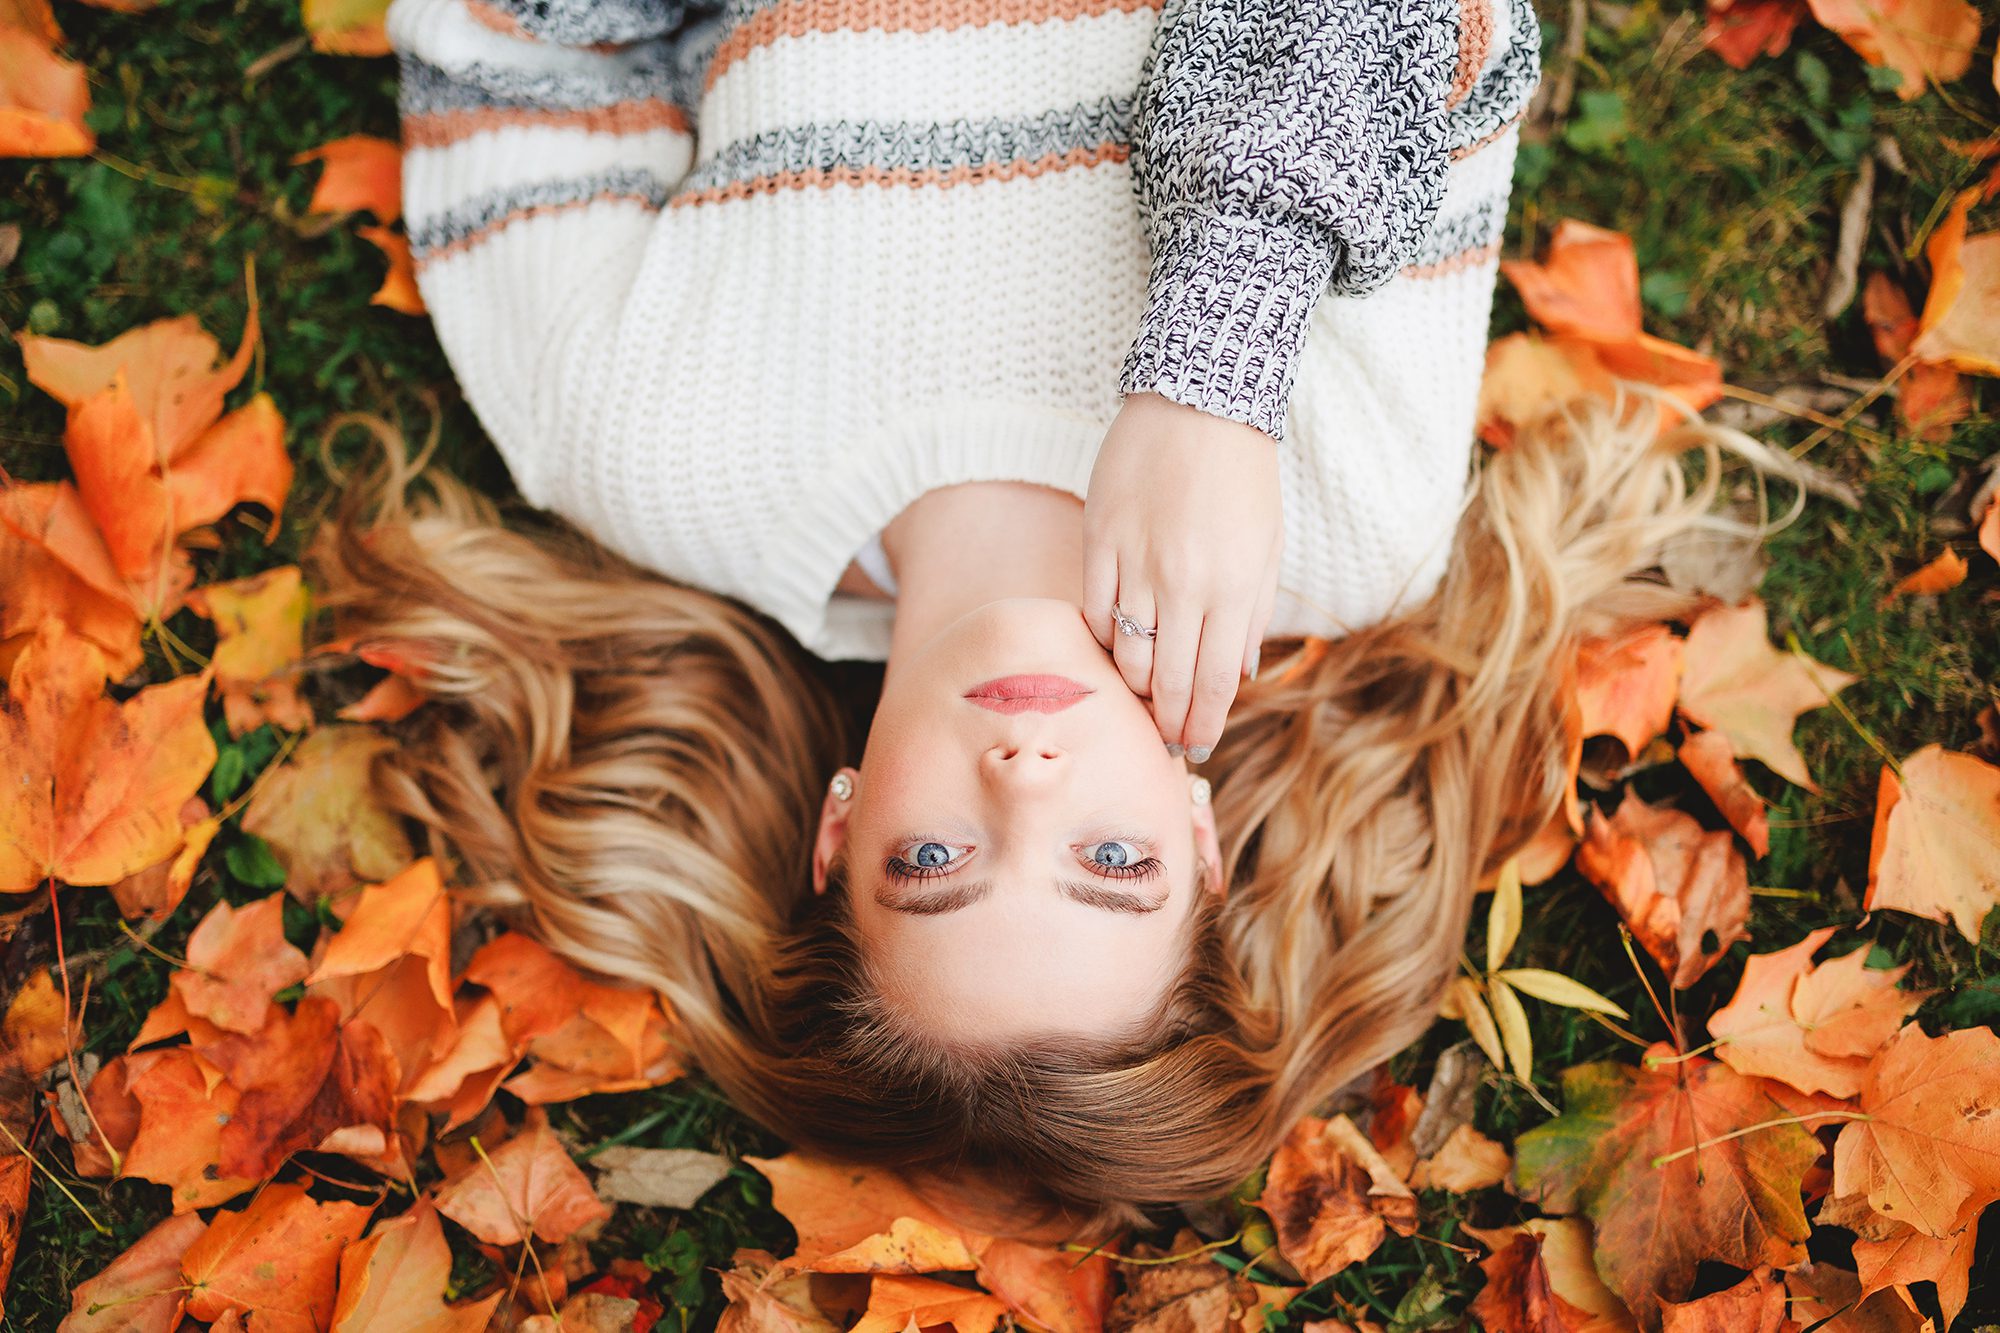 Overhead view of Central Crossing High School Senior Darby laying in fall leaves at Scioto Grove Metro Park